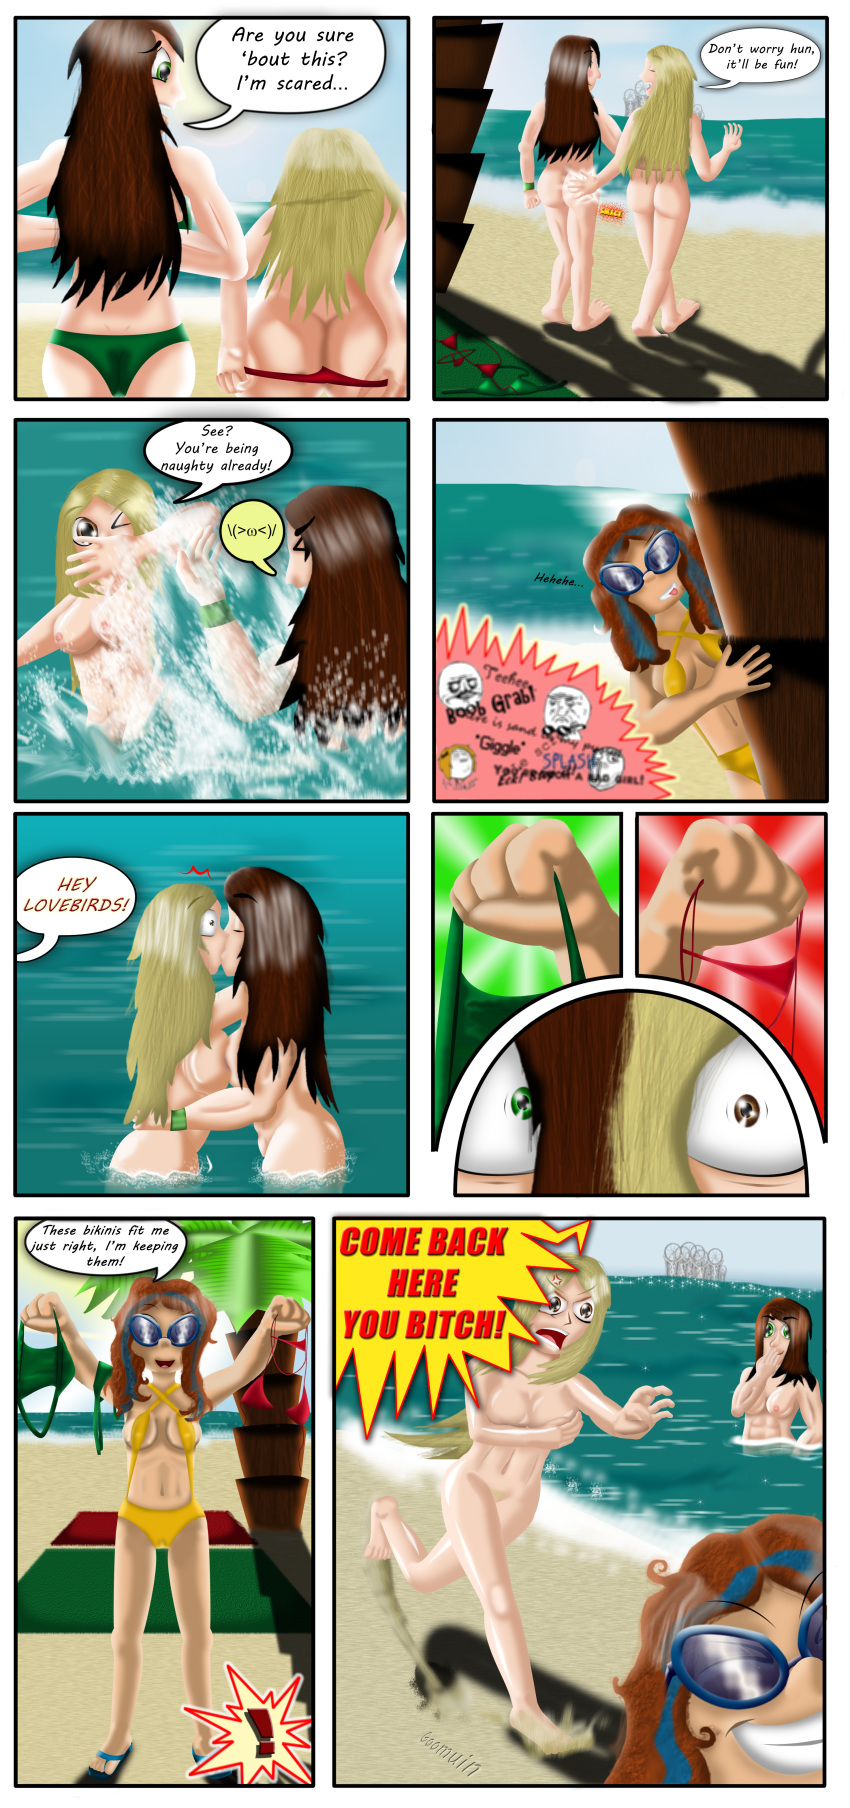 abs angry ass beach blonde_hair breasts brown_eyes brown_hair cfnf cleavage closed_eyes clothed_female_nude_female clothes_thief comic cover_up embarrassing enf female_butt_nudity female_full_frontal_nudity female_nudity fully_nude_girls_skinny_dipping funny goggles green_eyes kissing long_hair multicolored_hair nude nude_for_laughs ocean pubic_hair pussy skinny_dipping smile surprise undressing water